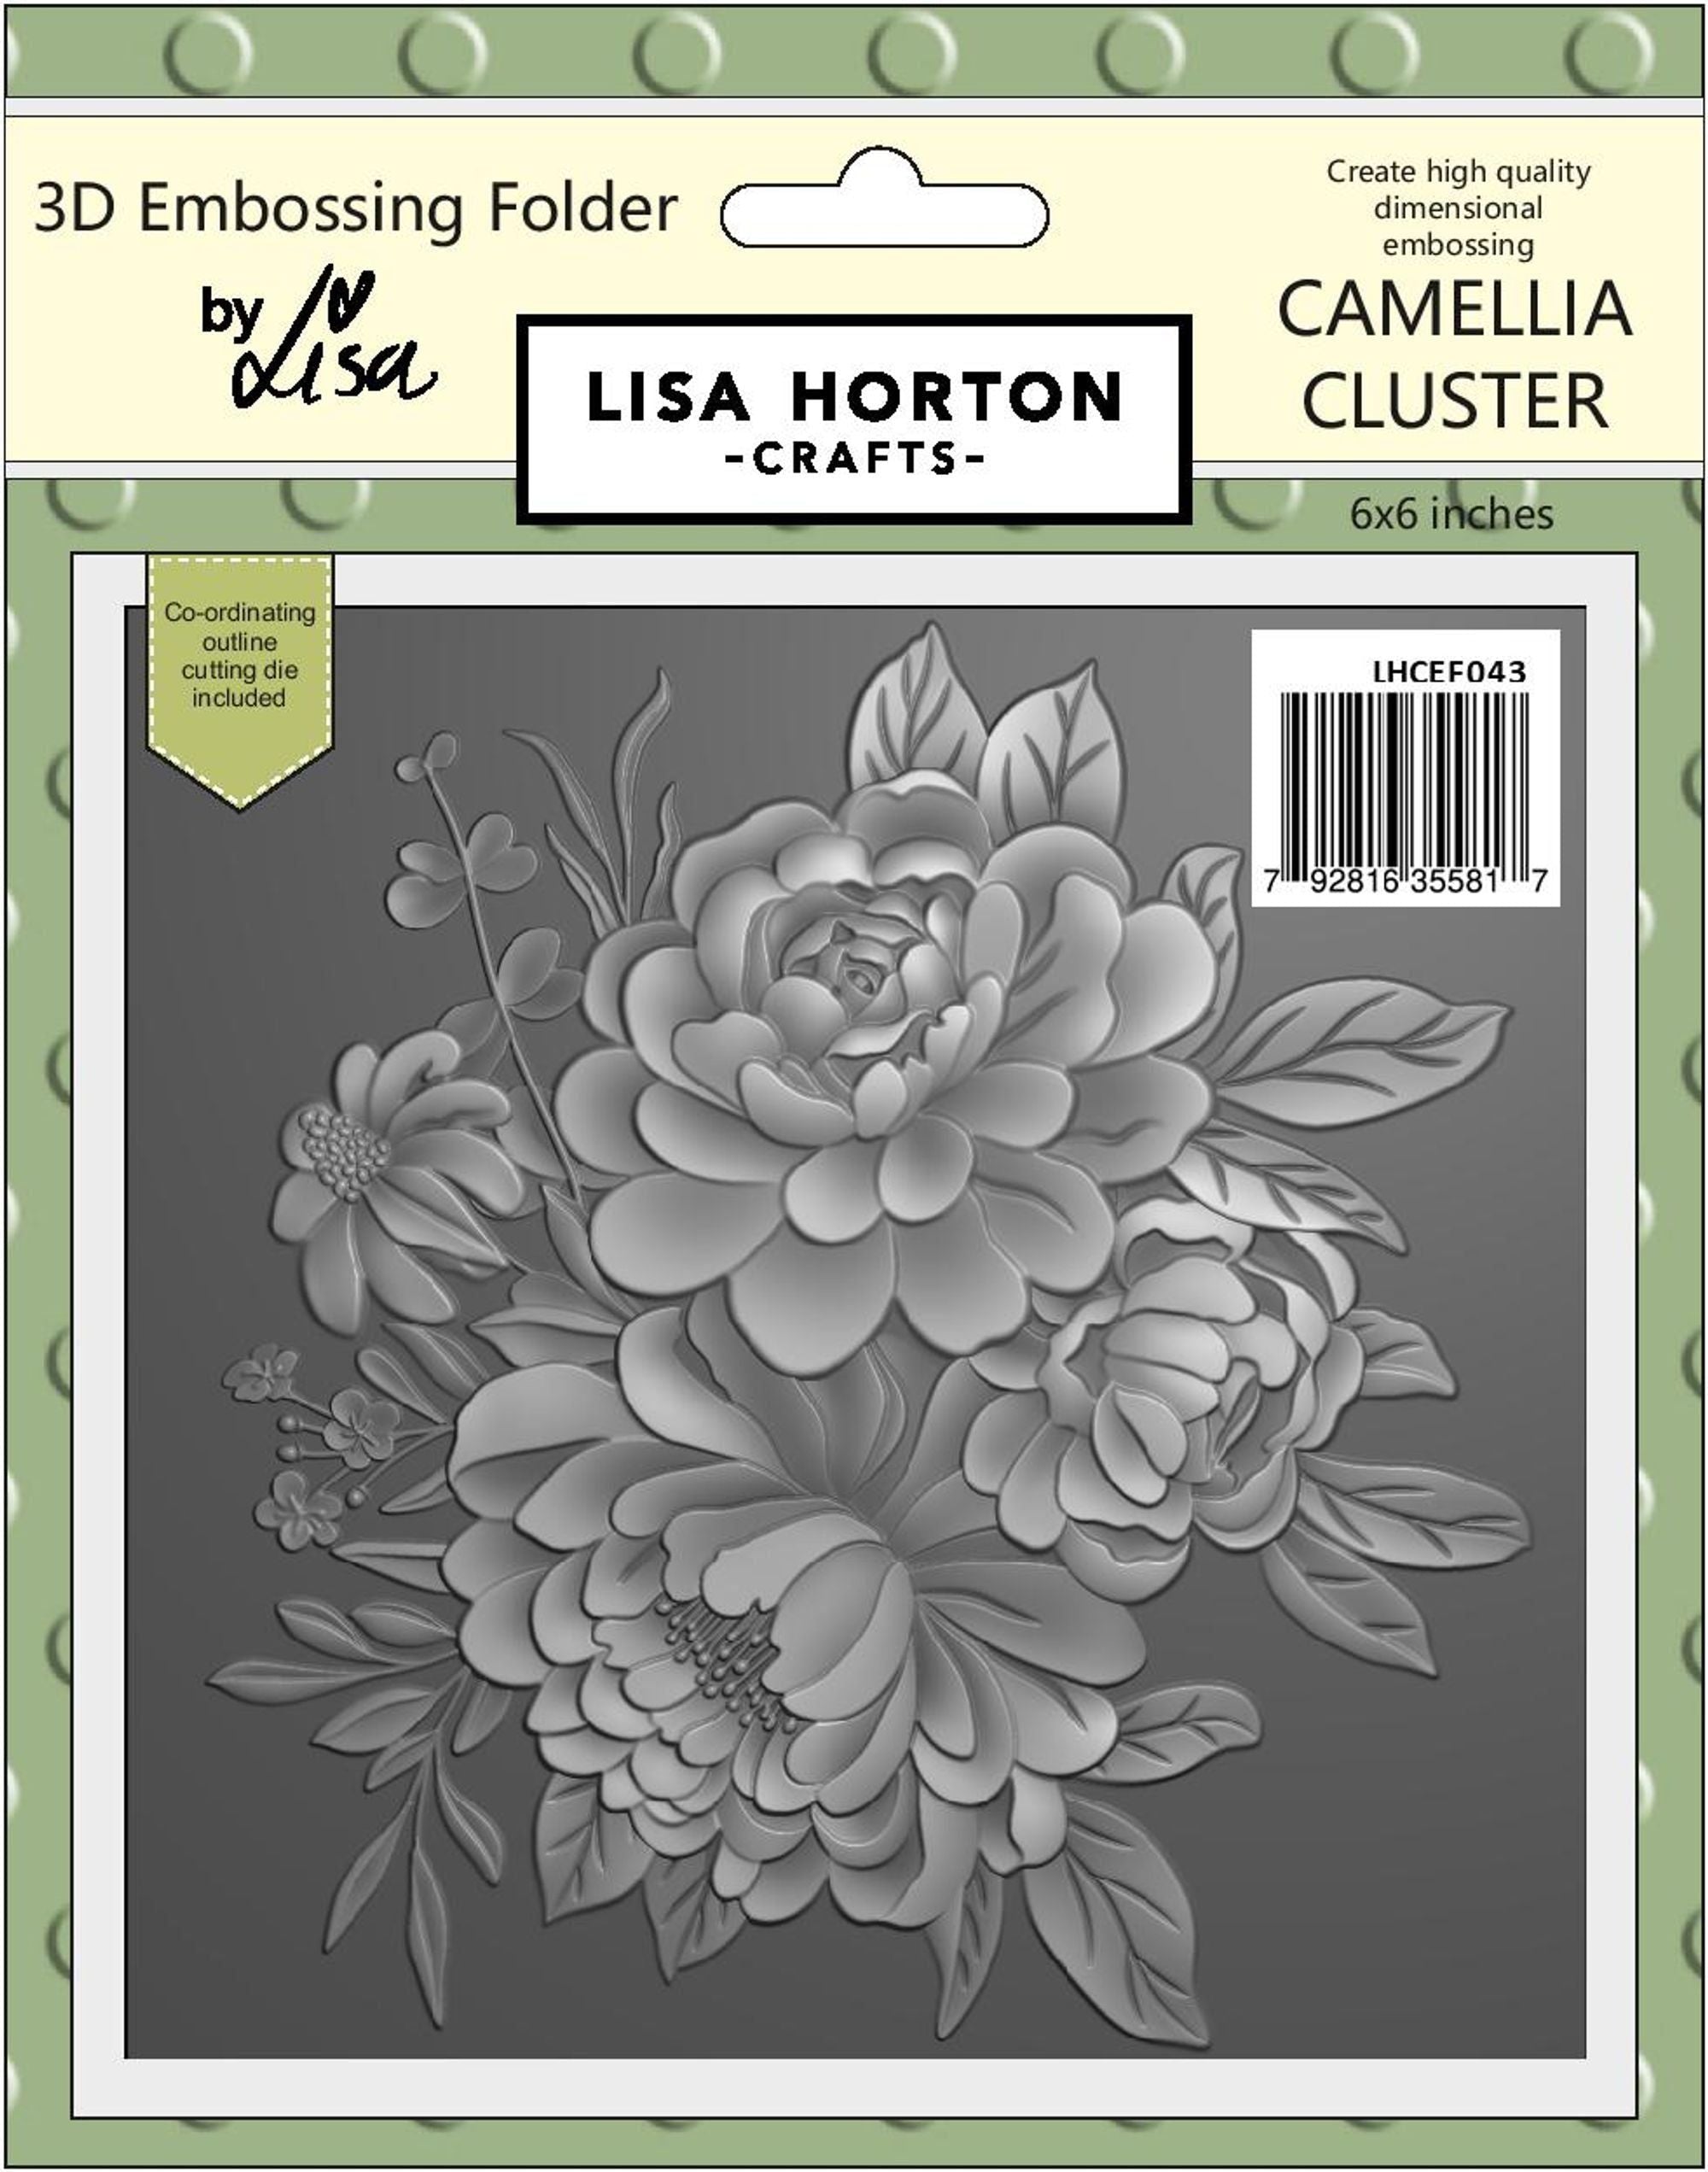 Camellia Cluster 6x6 3D Embossing Folder With Cutting Die